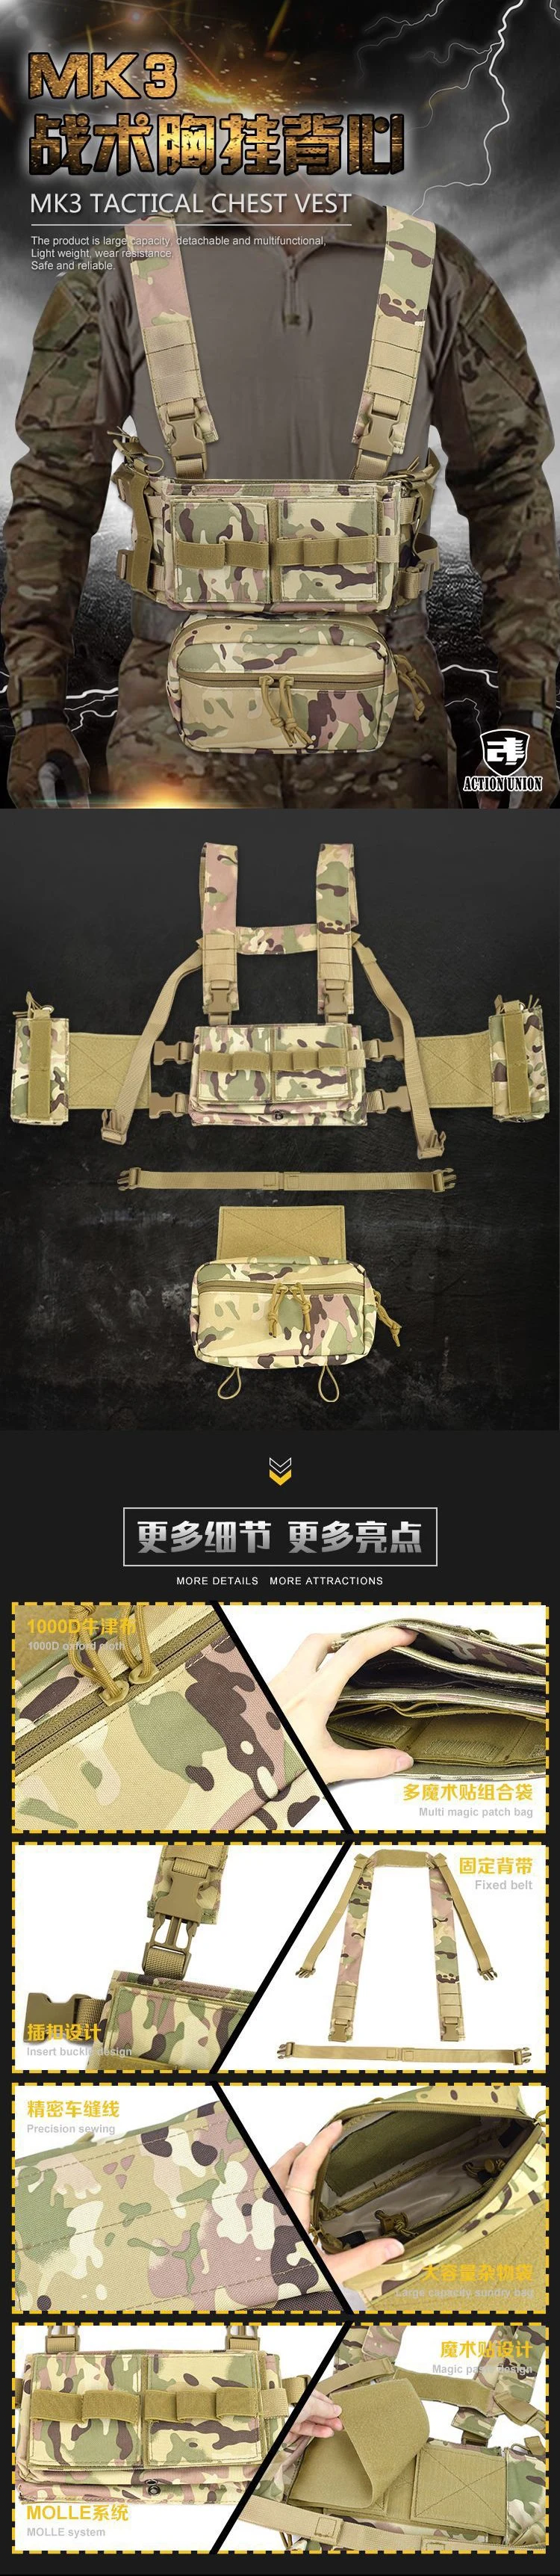 Custom Logo MK3 Camouflage Military Style Tactical Vest Gear Swat Tactical Vest Combat Vest Chest Rig with Ak